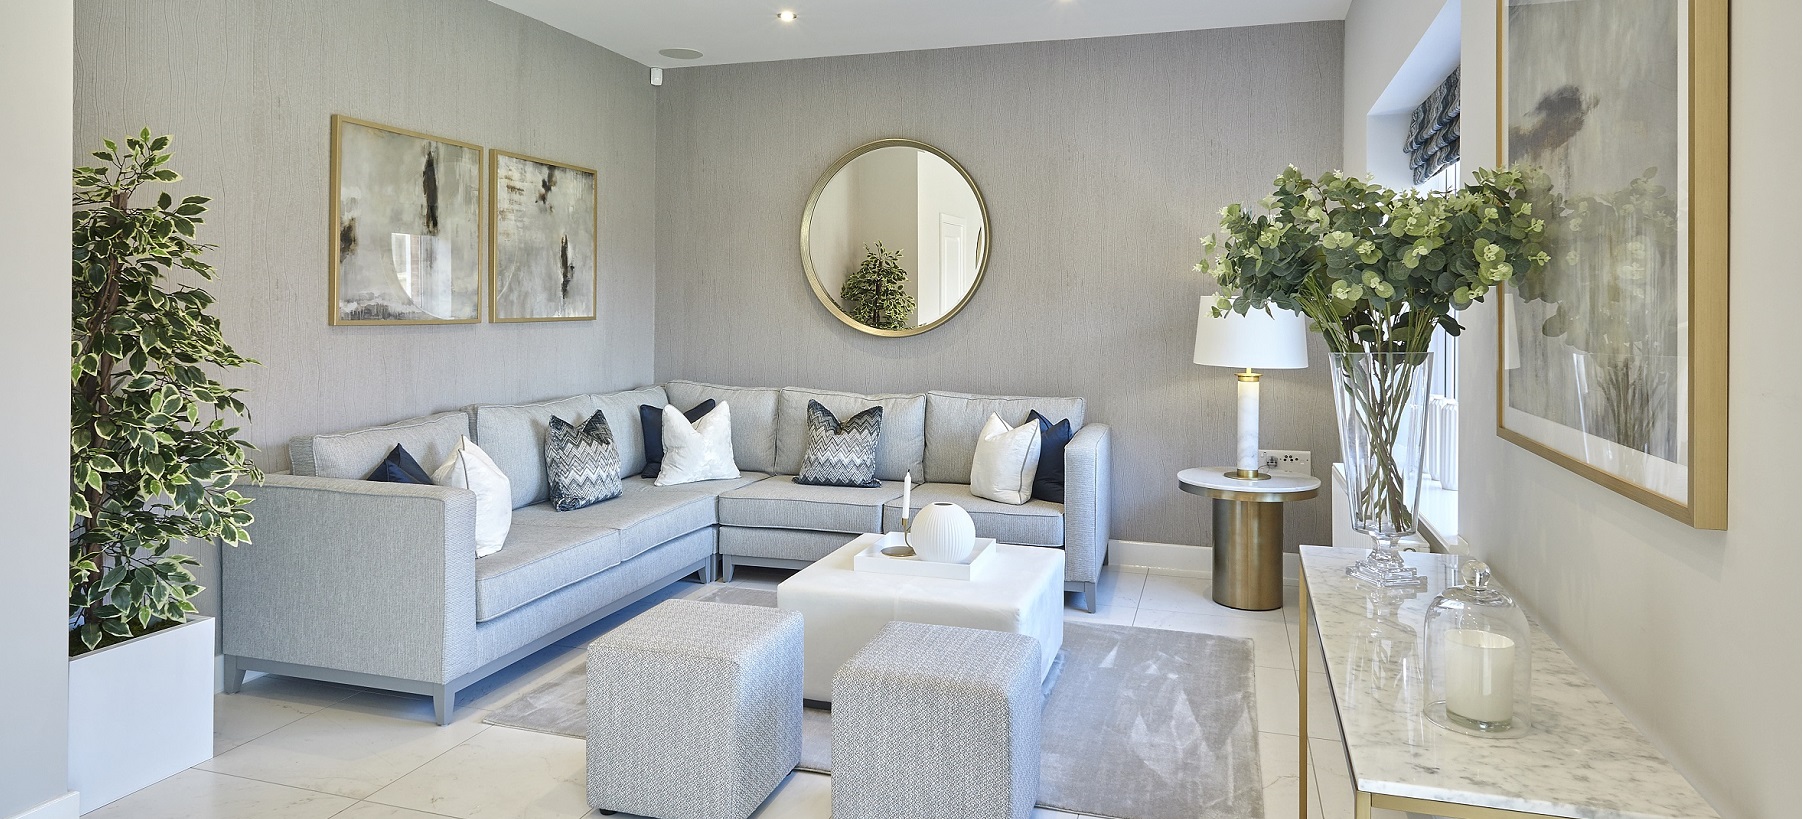 A stylish living room in a Jones Homes new build.